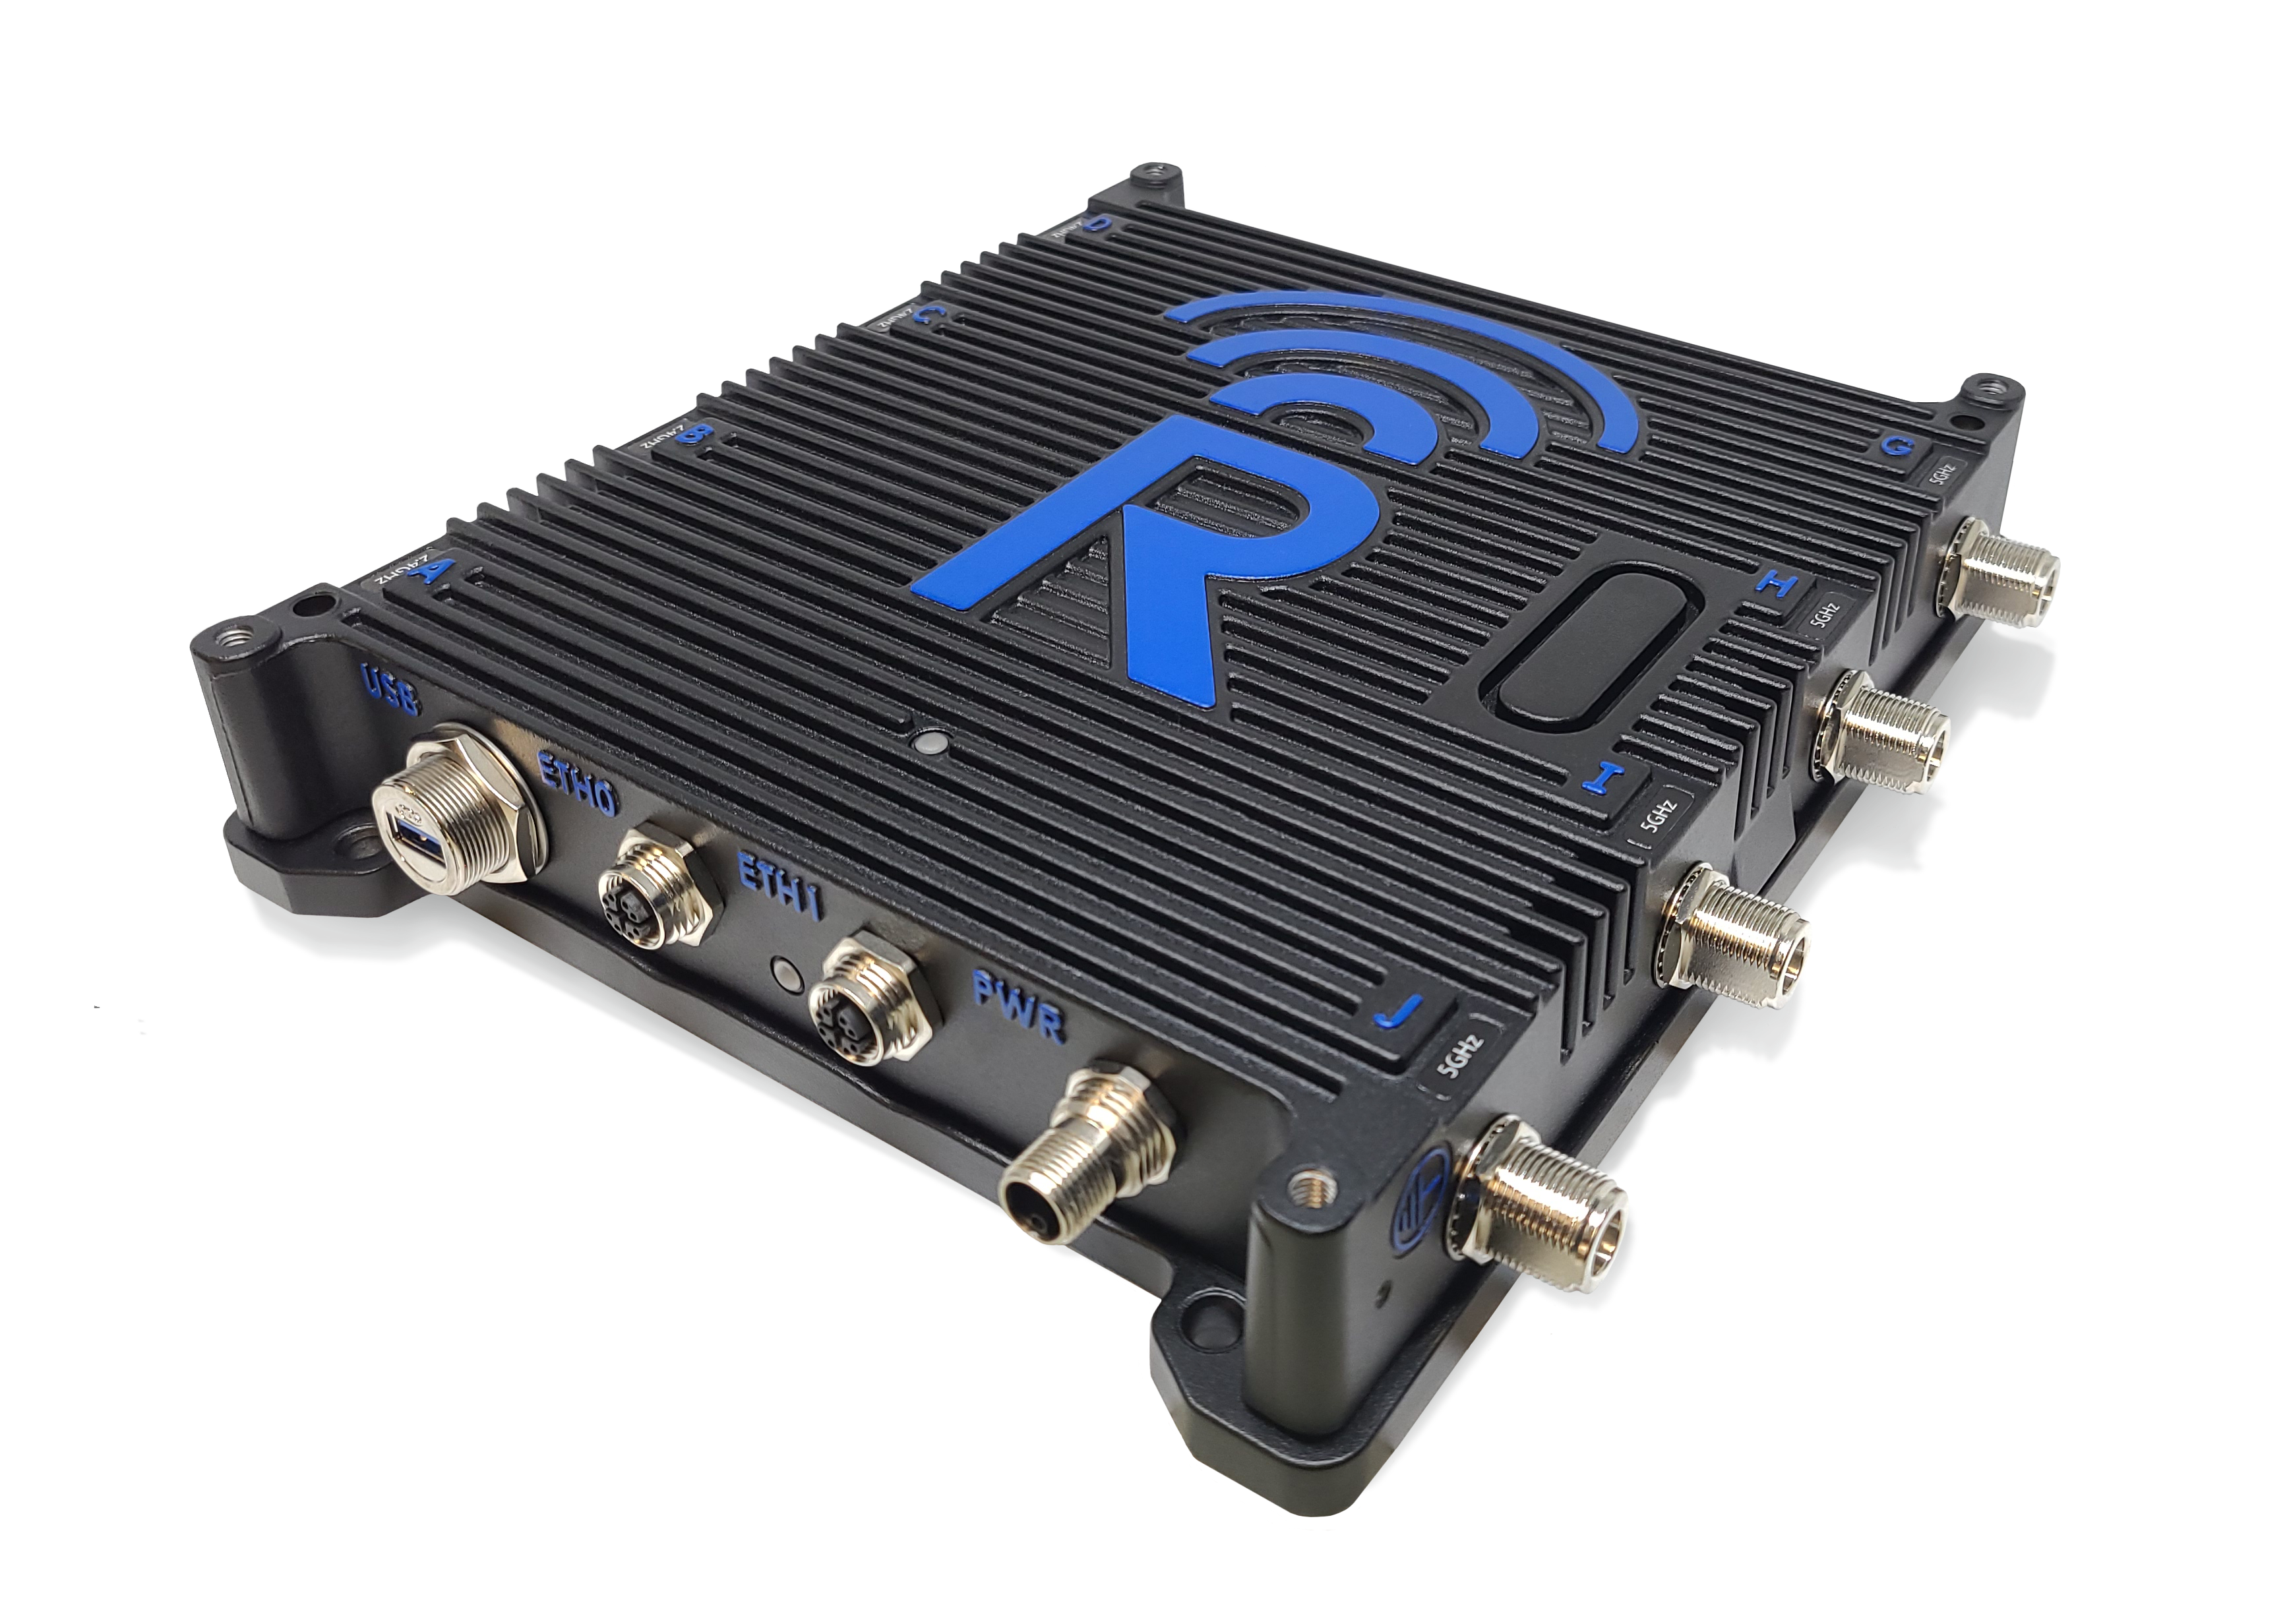 Rajant Peregrine BreadCrumb - a high-performance industrial-grade wireless radio offering quad MIMO transceivers, up to 2.3Gbps aggregated data rate, higher throughput, and enhanced security performance